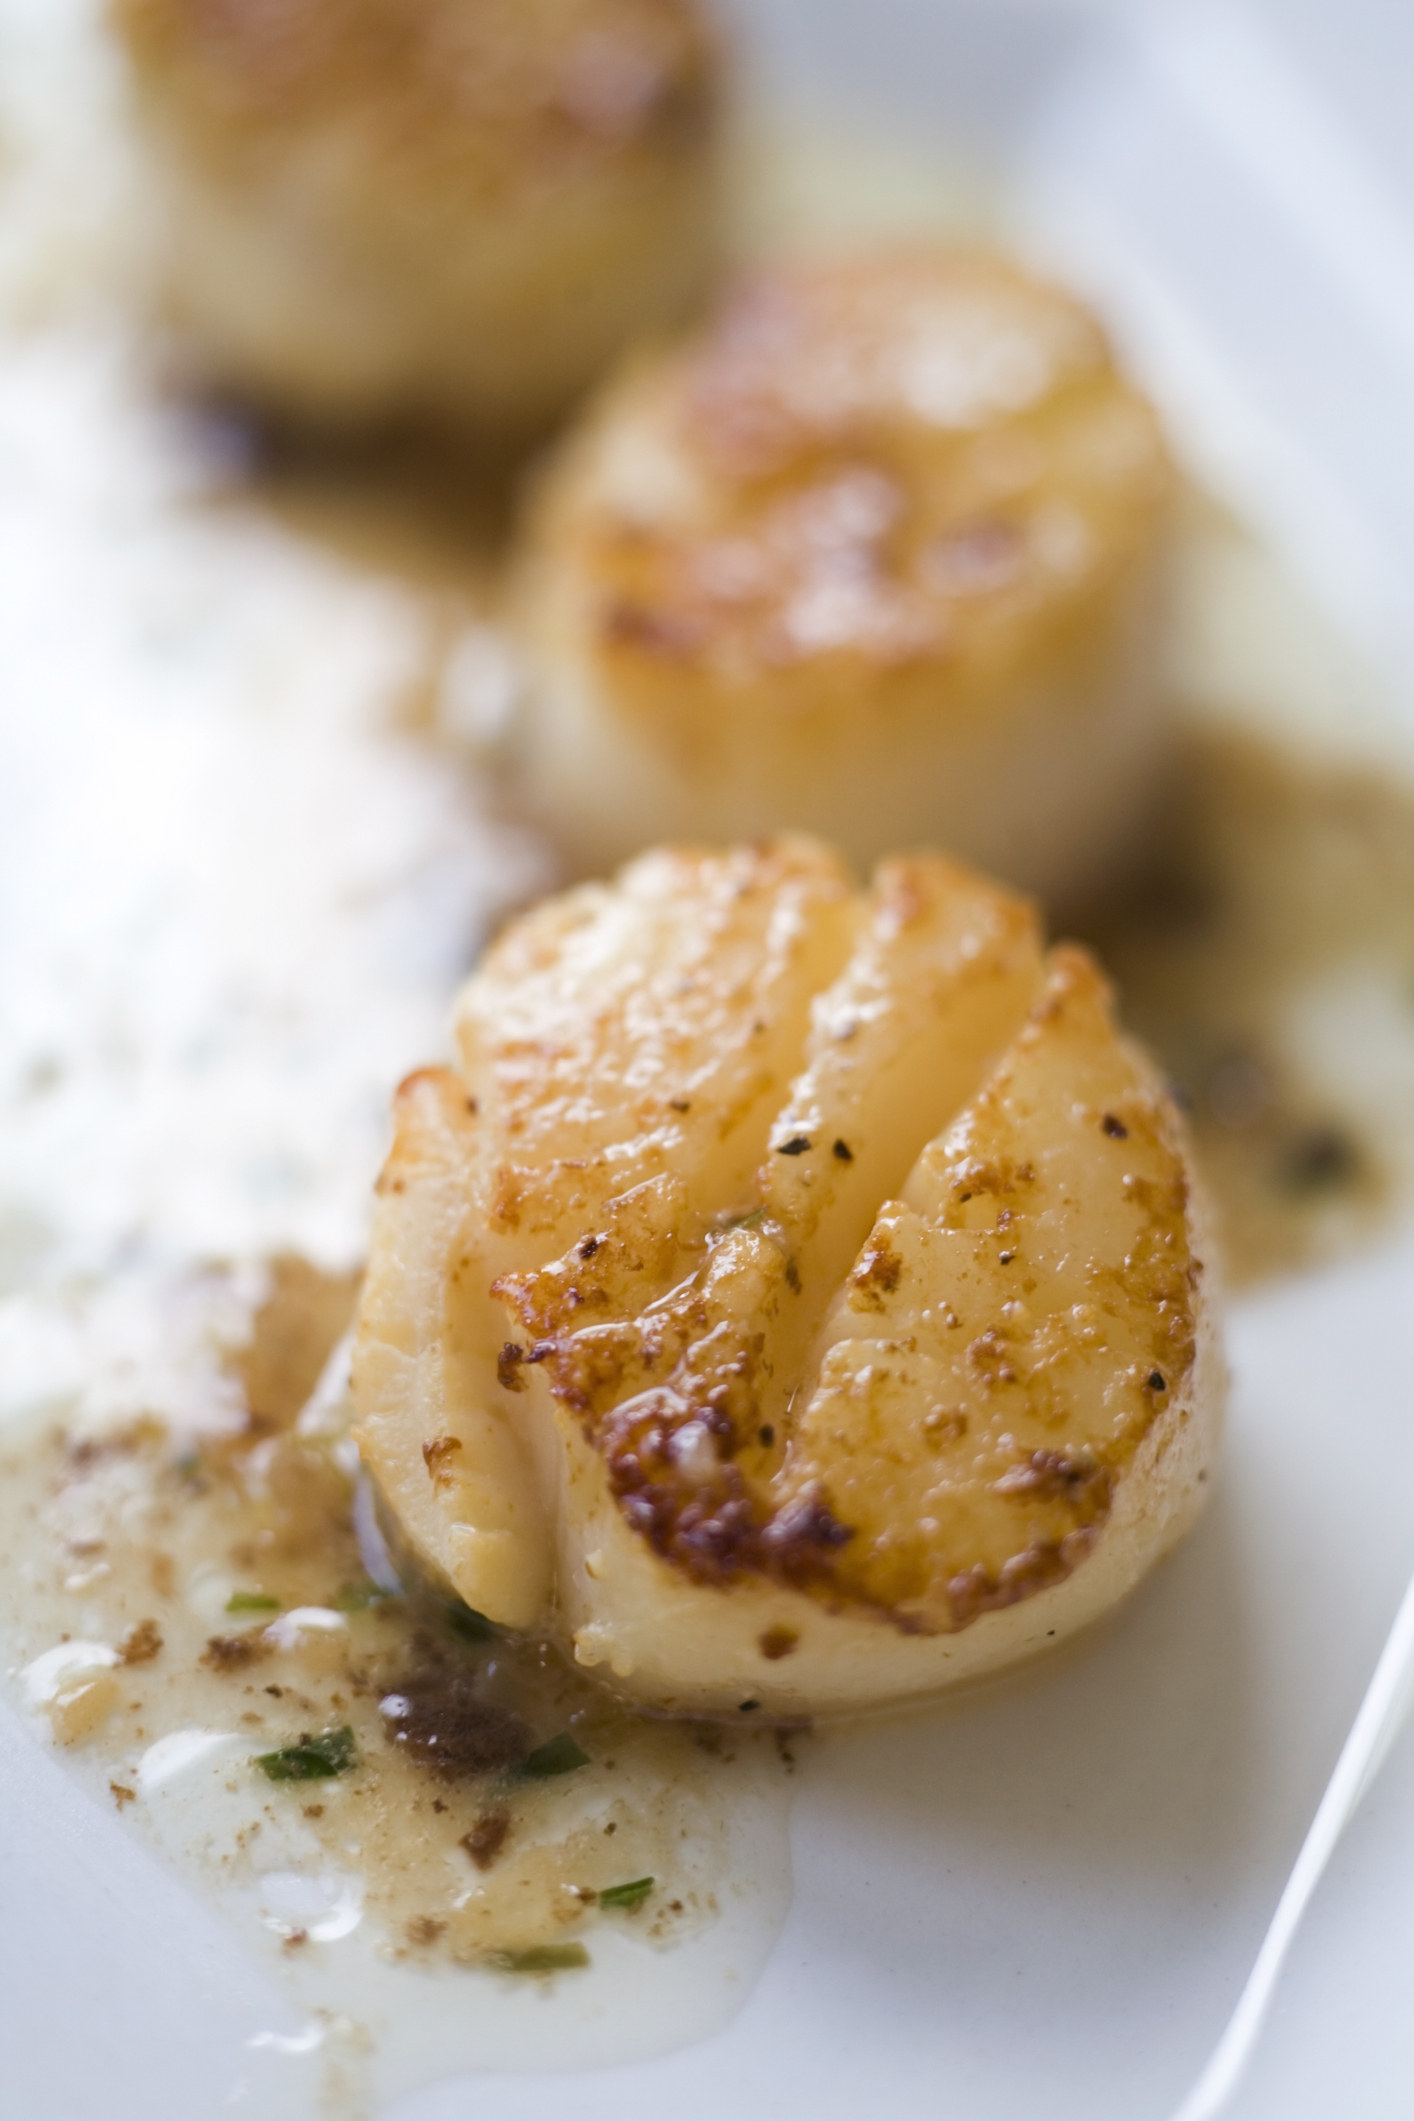 Scallops in herb butter on a white plate.